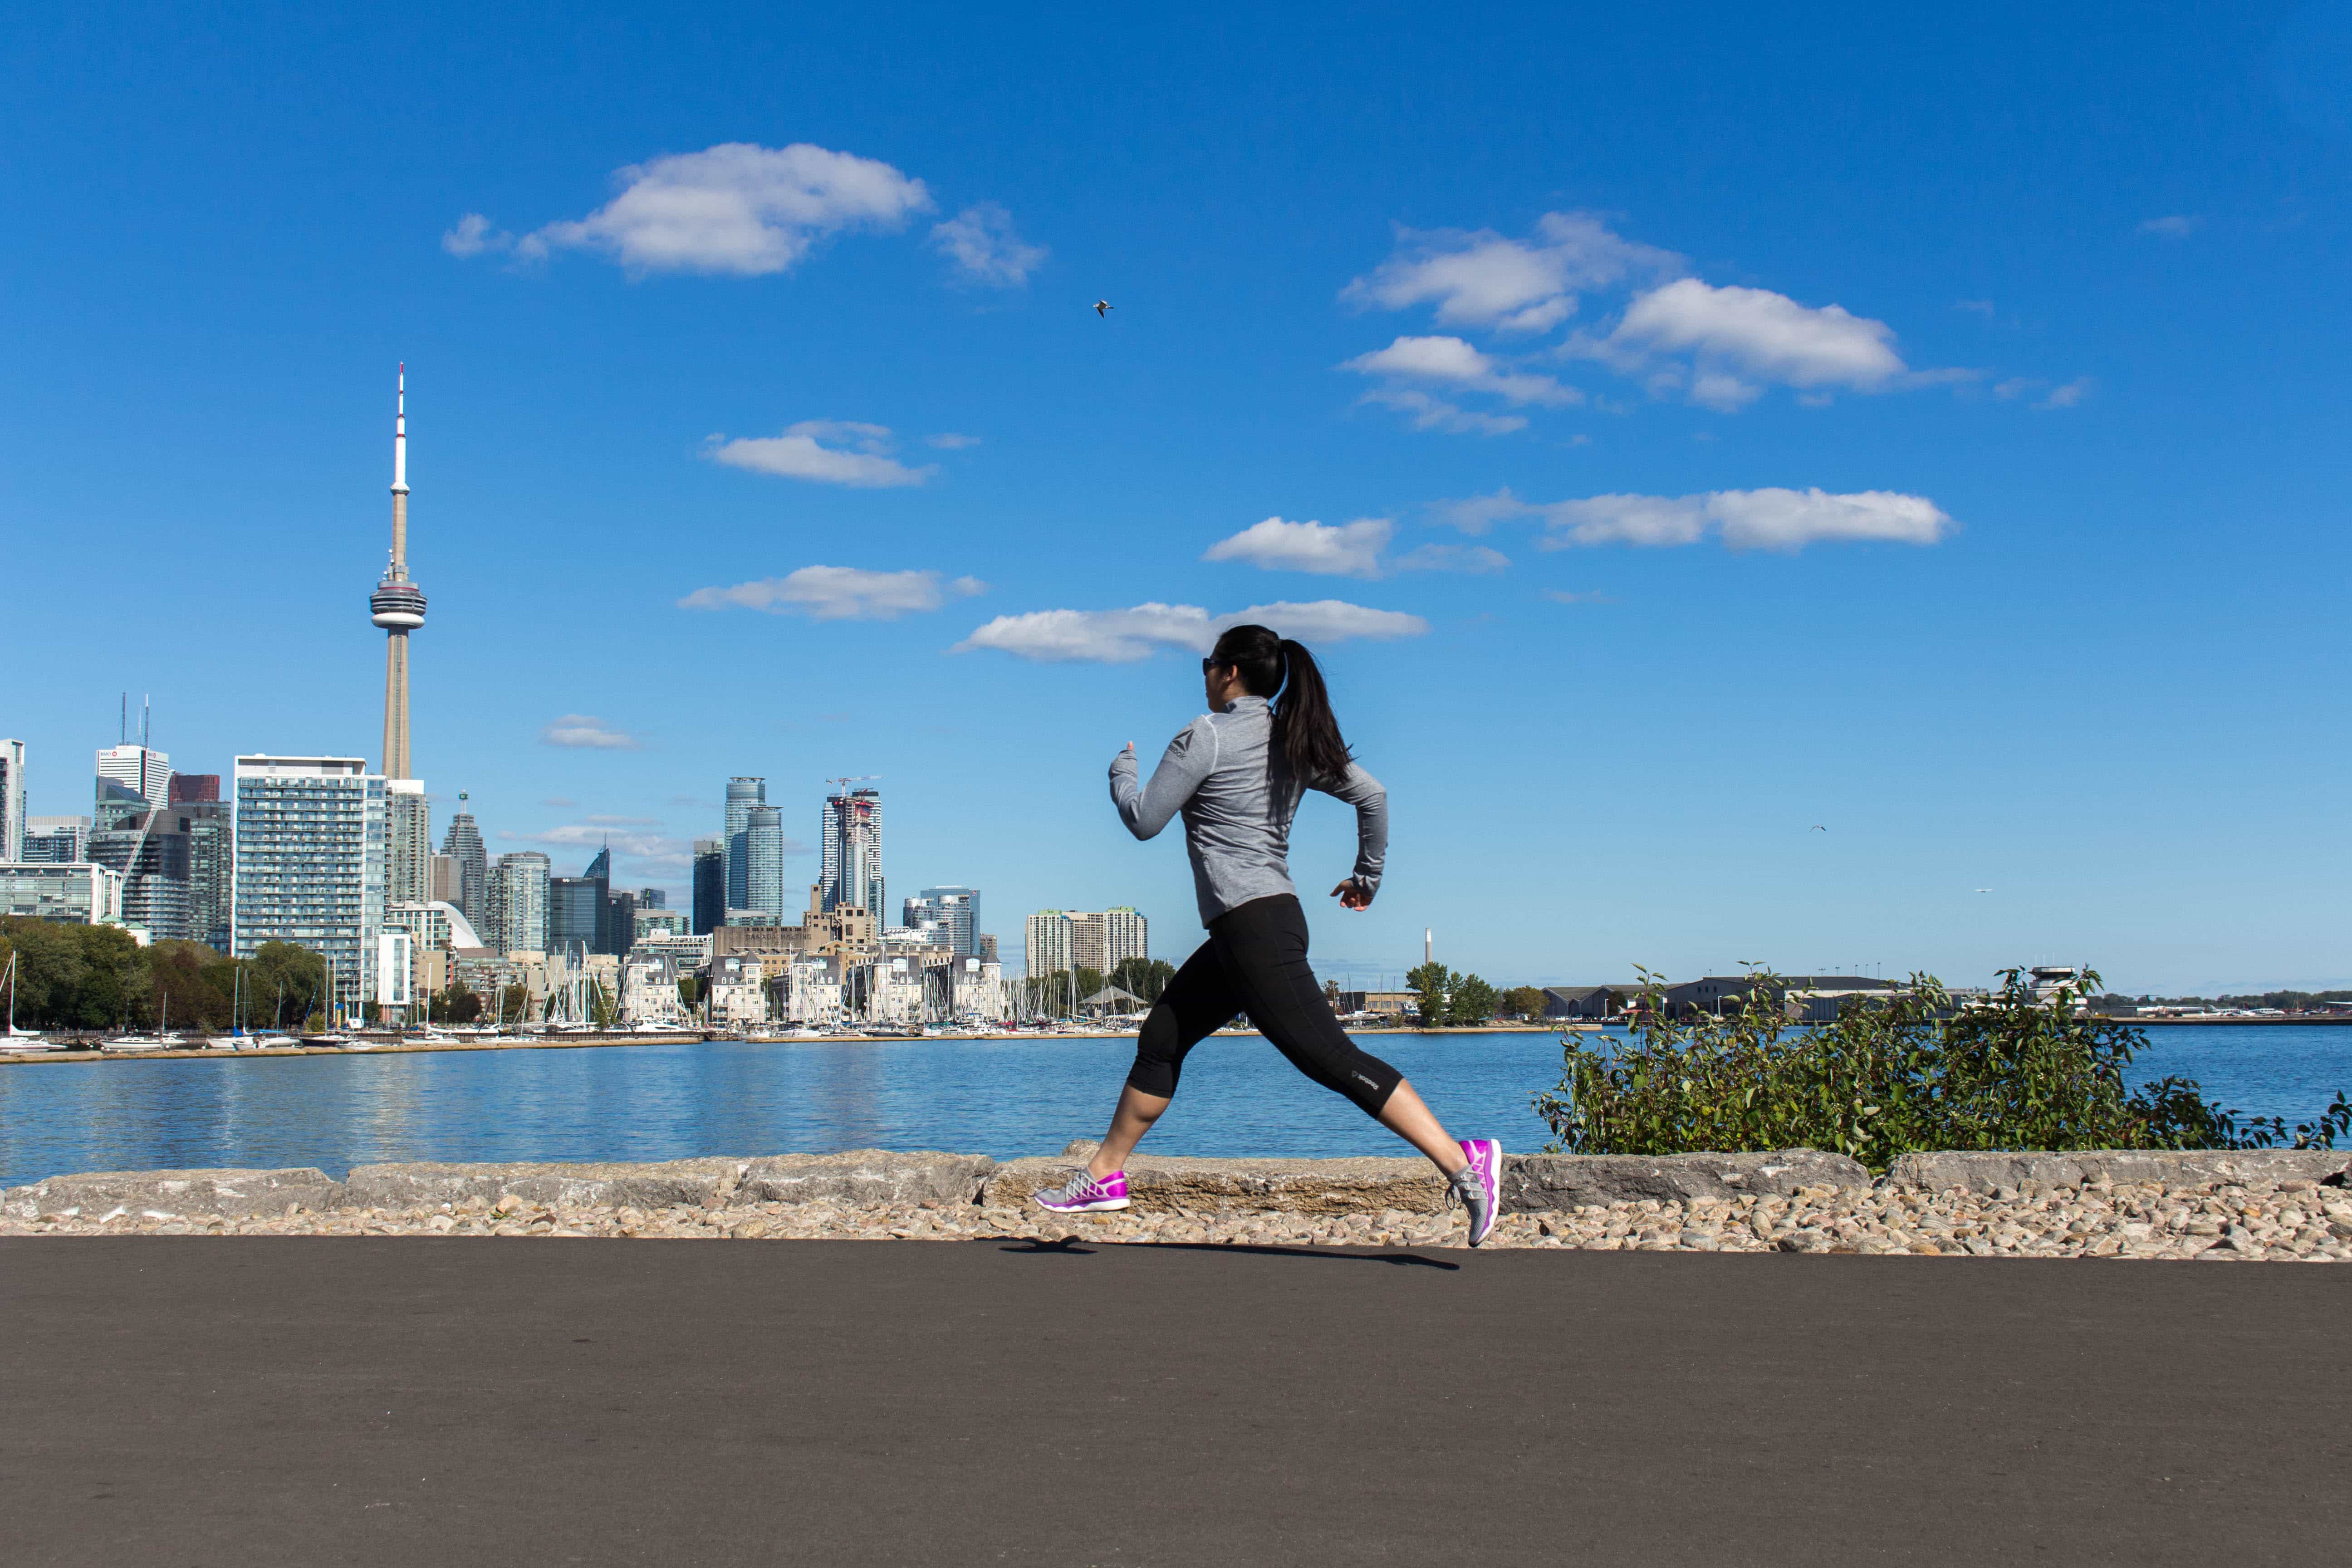 Are you a runner heading to Toronto? Here are a couple scenic places to run on your next trip to Toronto!